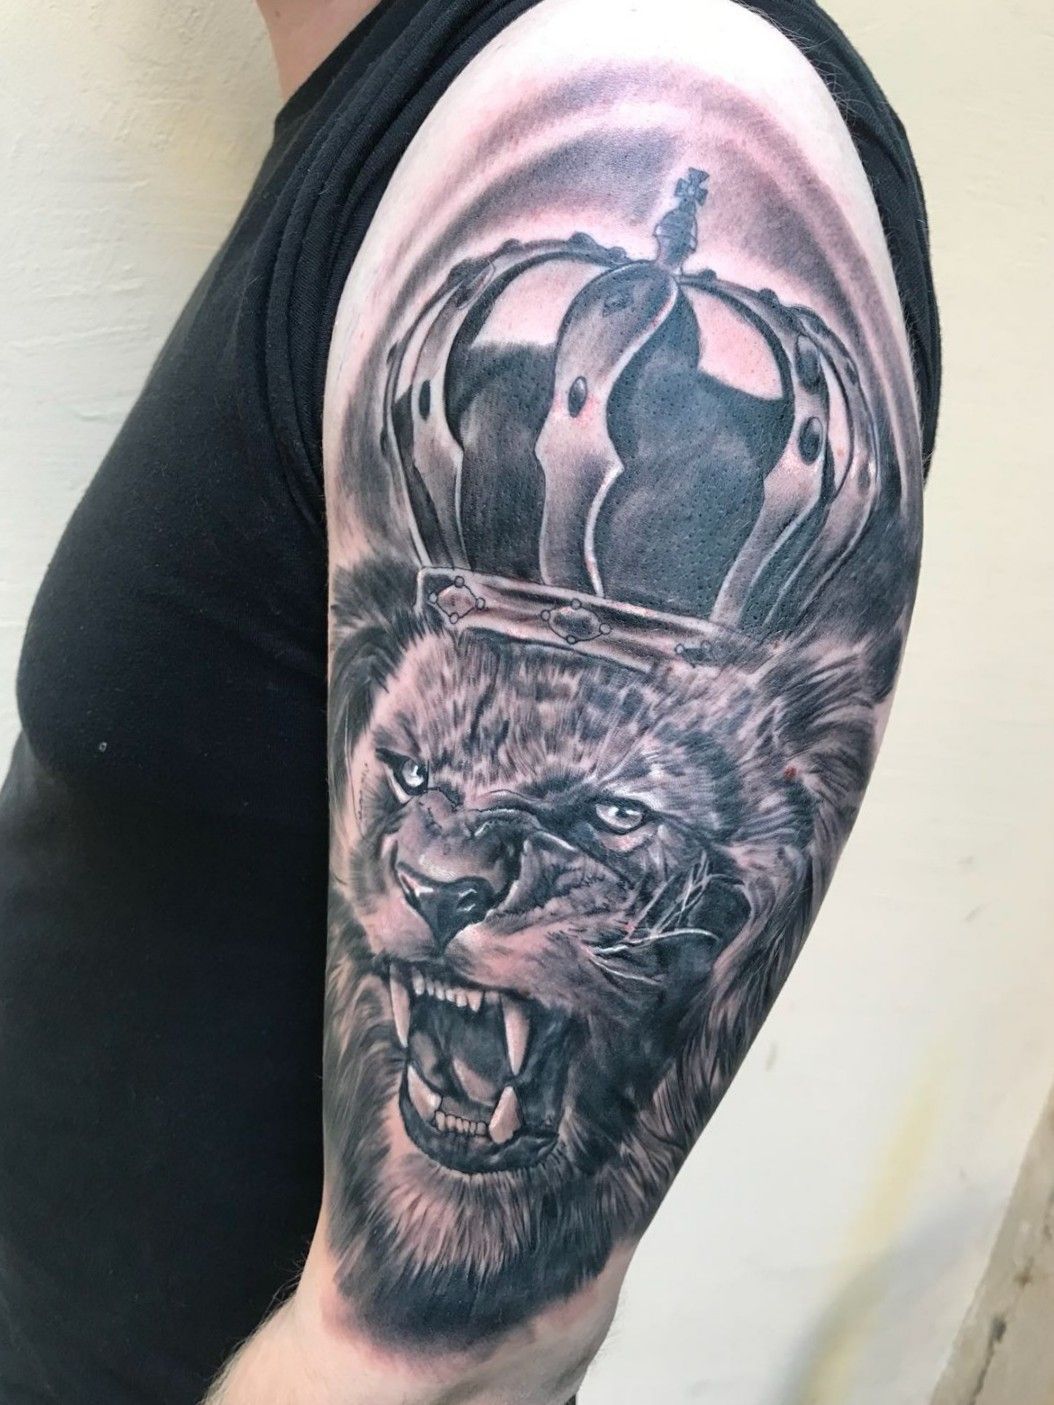 Share 102 about roaring lion tattoo drawing unmissable  indaotaonec